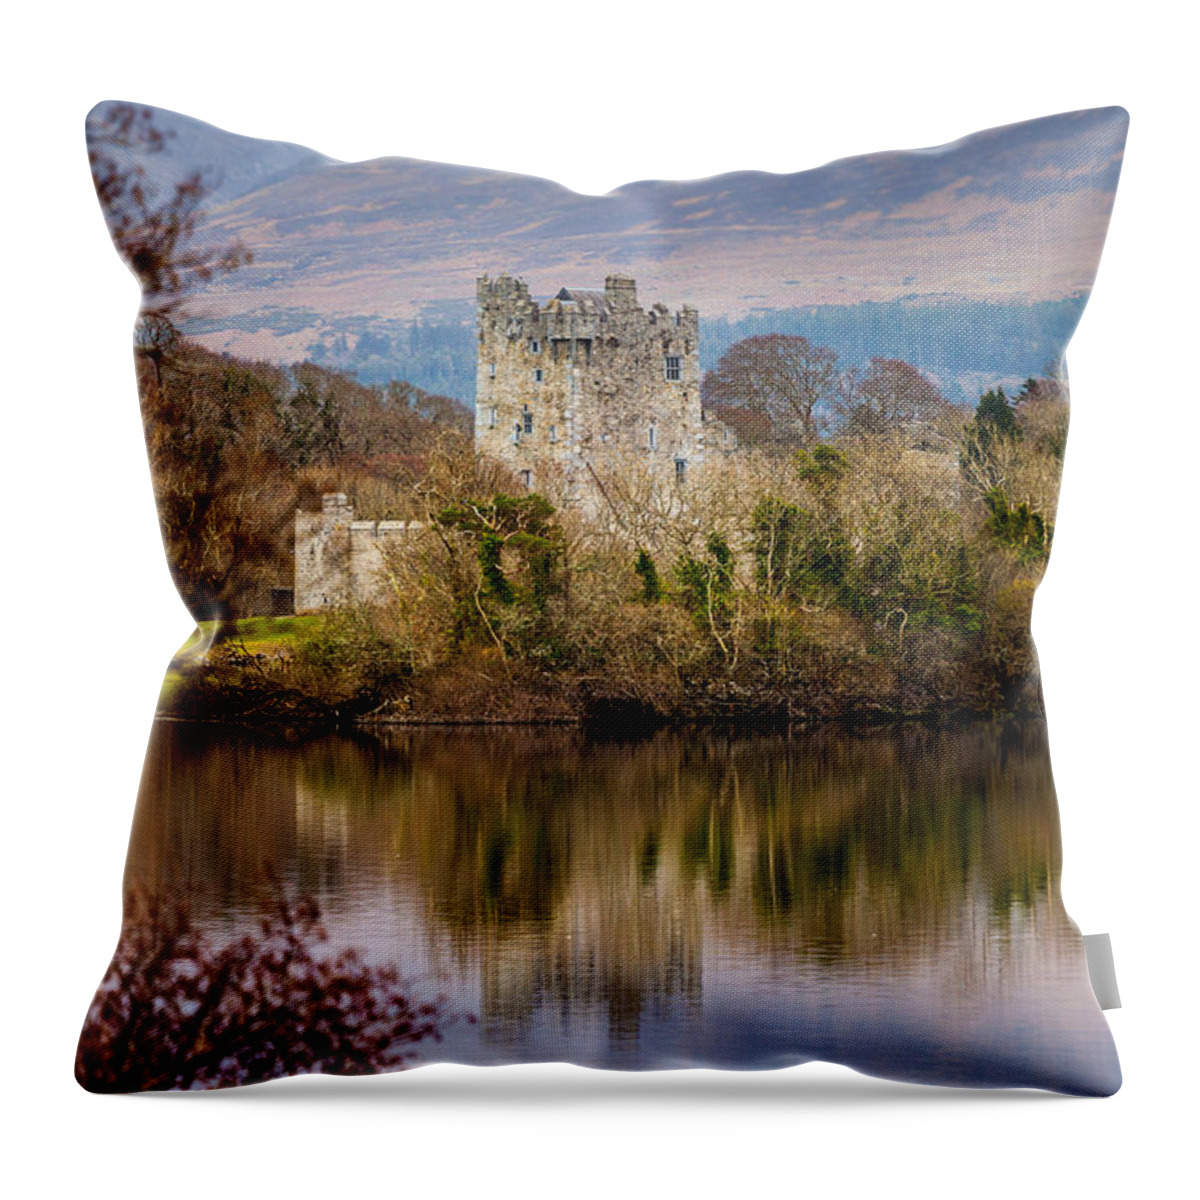 Killarney Throw Pillow featuring the photograph Old Irish Stronghold by W Chris Fooshee